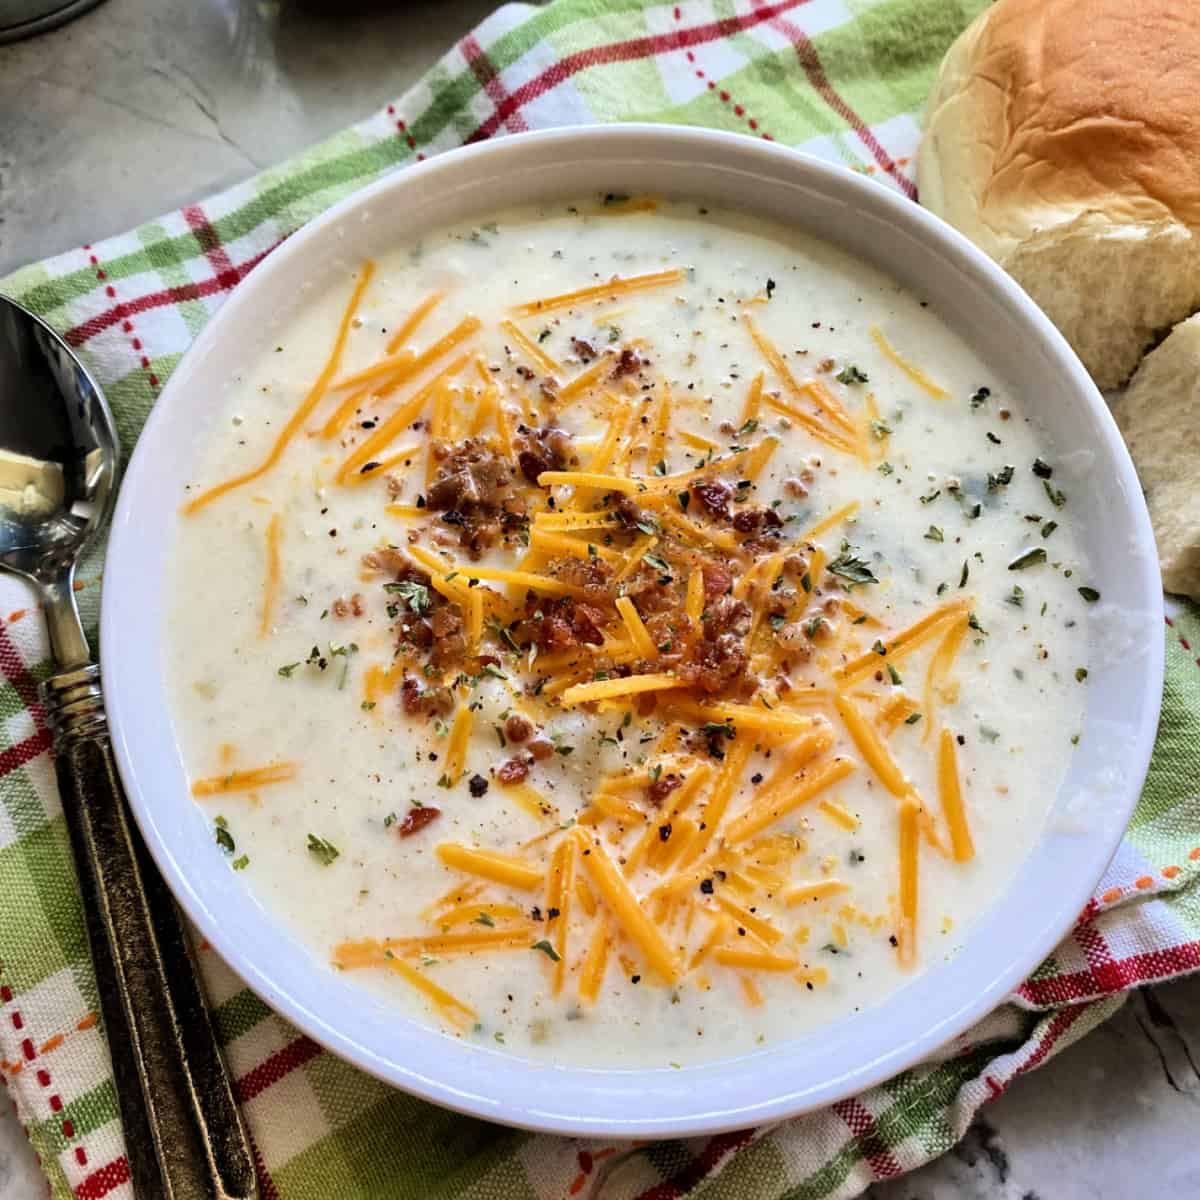 https://www.katiescucina.com/wp-content/uploads/2020/11/leftover-mashed-potatoes-soup-square.jpg